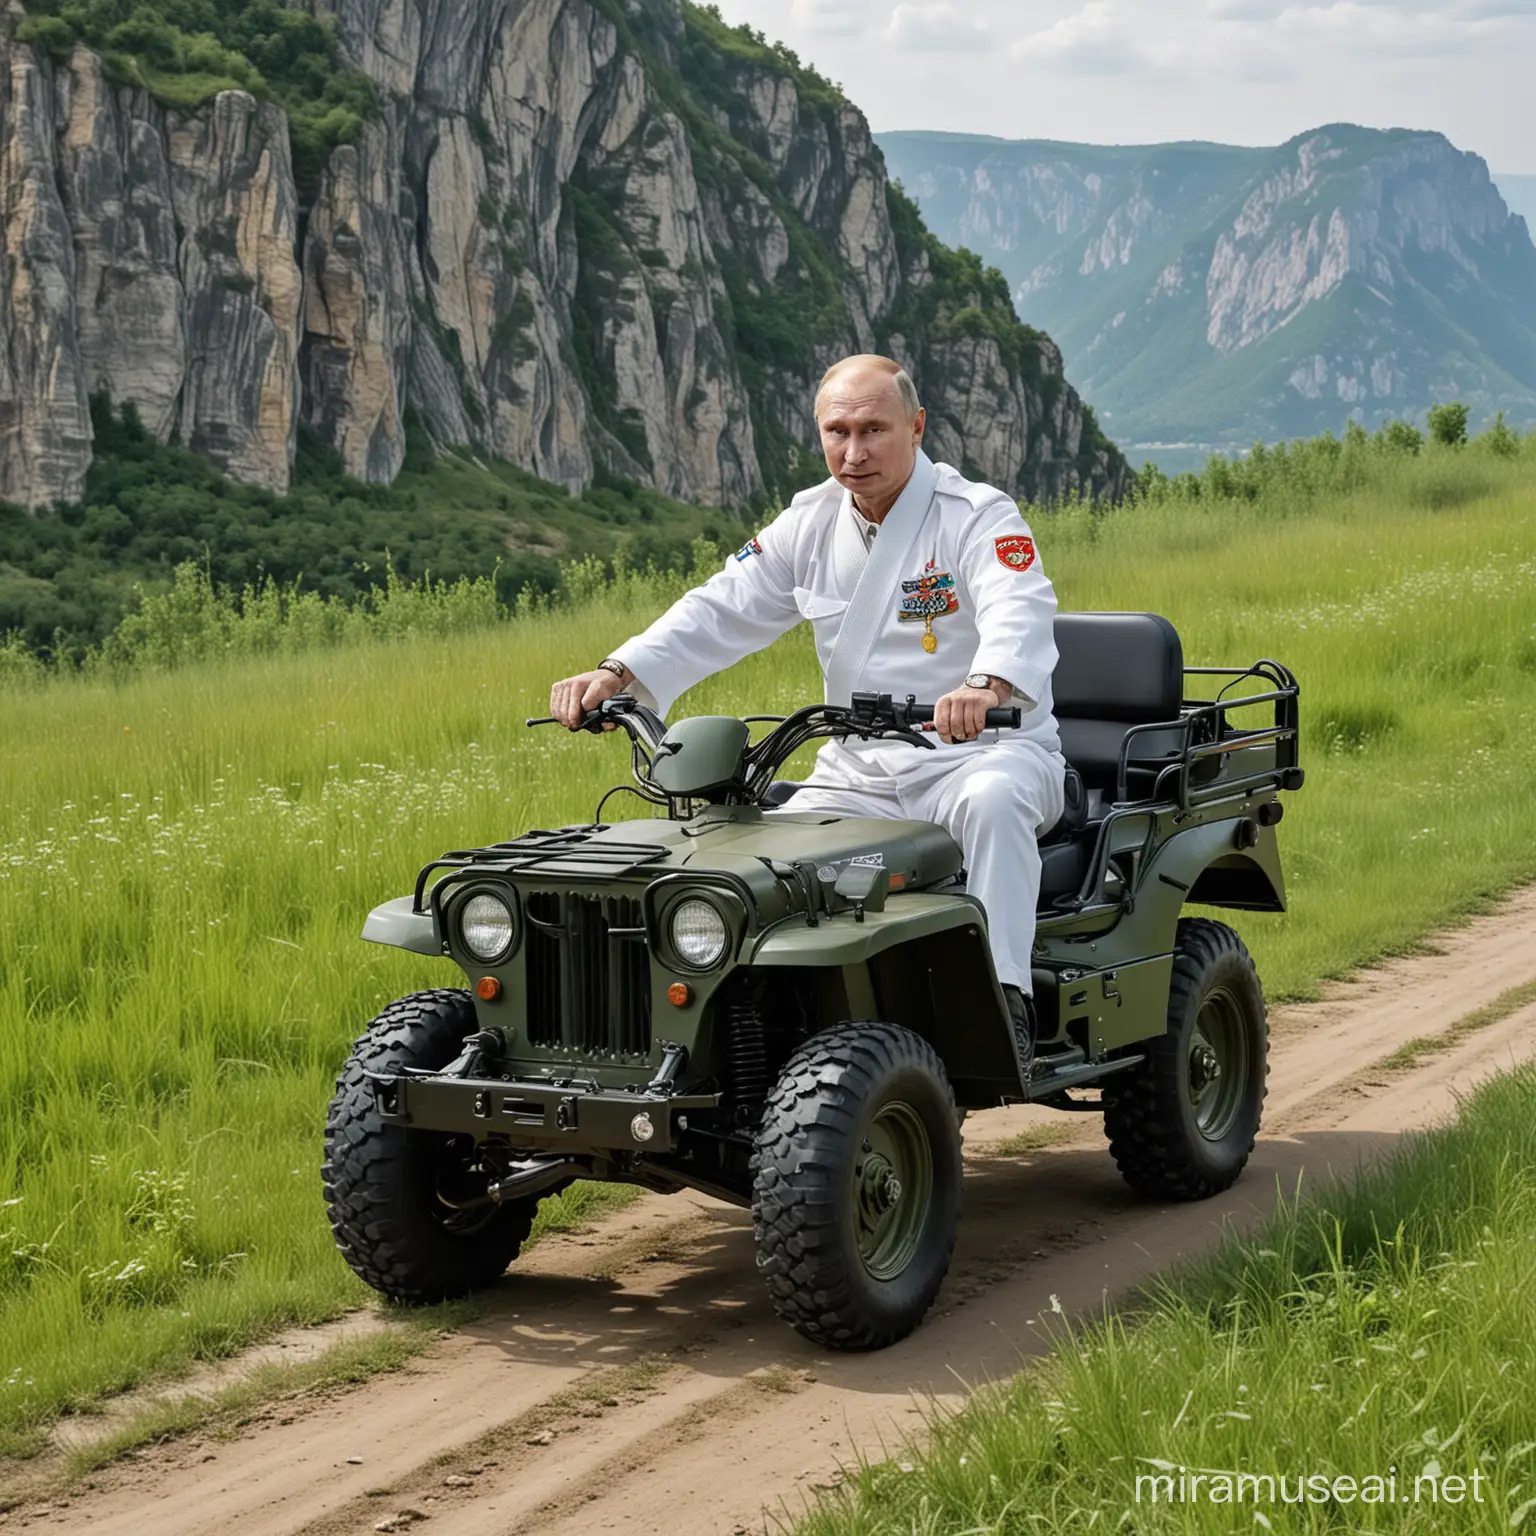 Senior Putin in White Judo Gear Riding a White Harley on a Green Cliff Zelensky in Vintage US Jeep in Pursuit